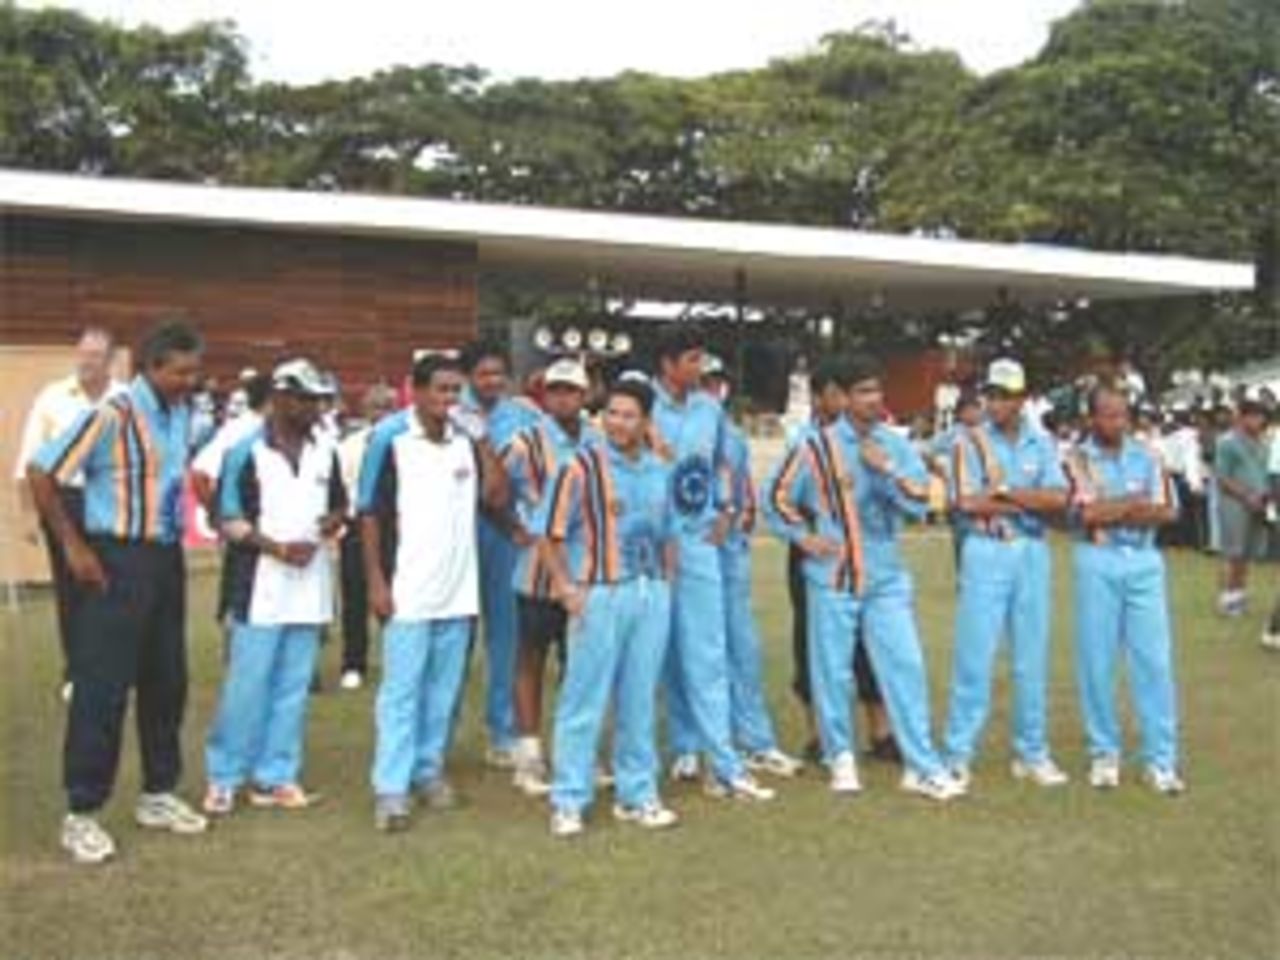 The Indian Team waits for the presentation ceremony, India v West Indies (Final), Coca-Cola Singapore Challenge, 1999-2000, Kallang Ground, Singapore, 8 Sep 1999.